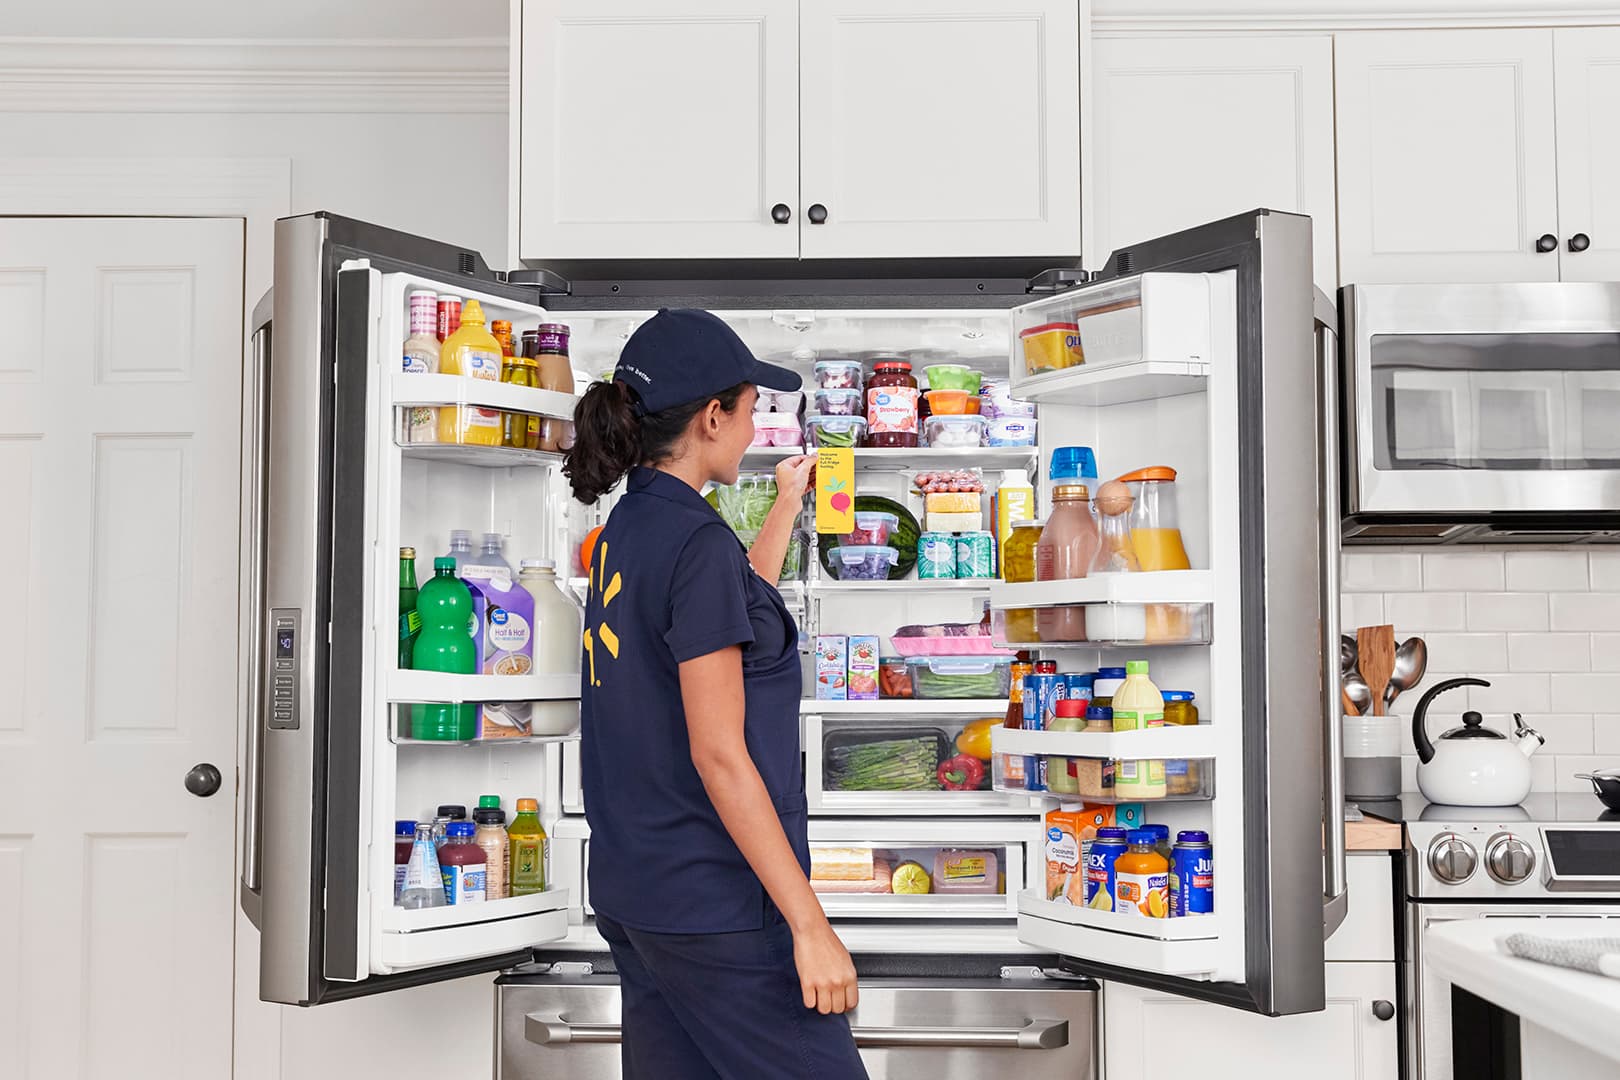 Walmart expands its direct-to-fridge InHome delivery service to 30 million homes